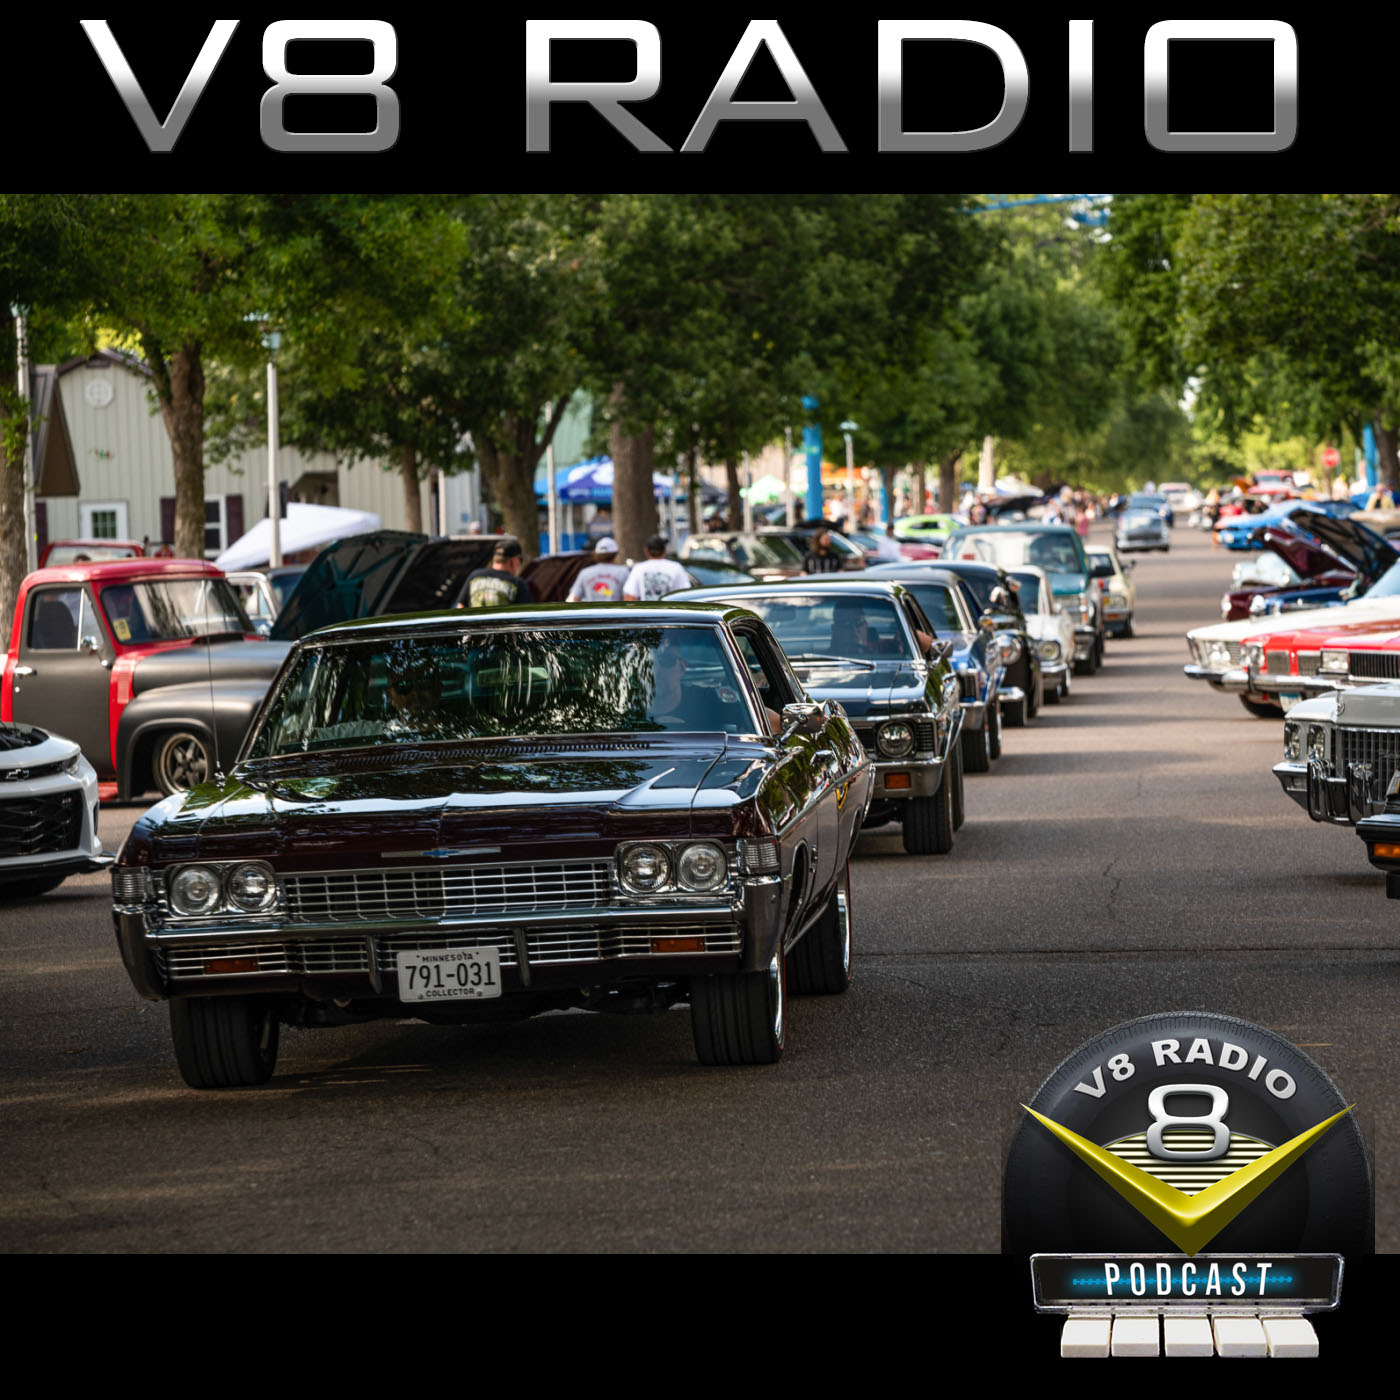 GTO Fixes, Street Machine Summer Nationals, Automotive Trivia, Drive In Cruise, and More on the V8 Radio Podcast!